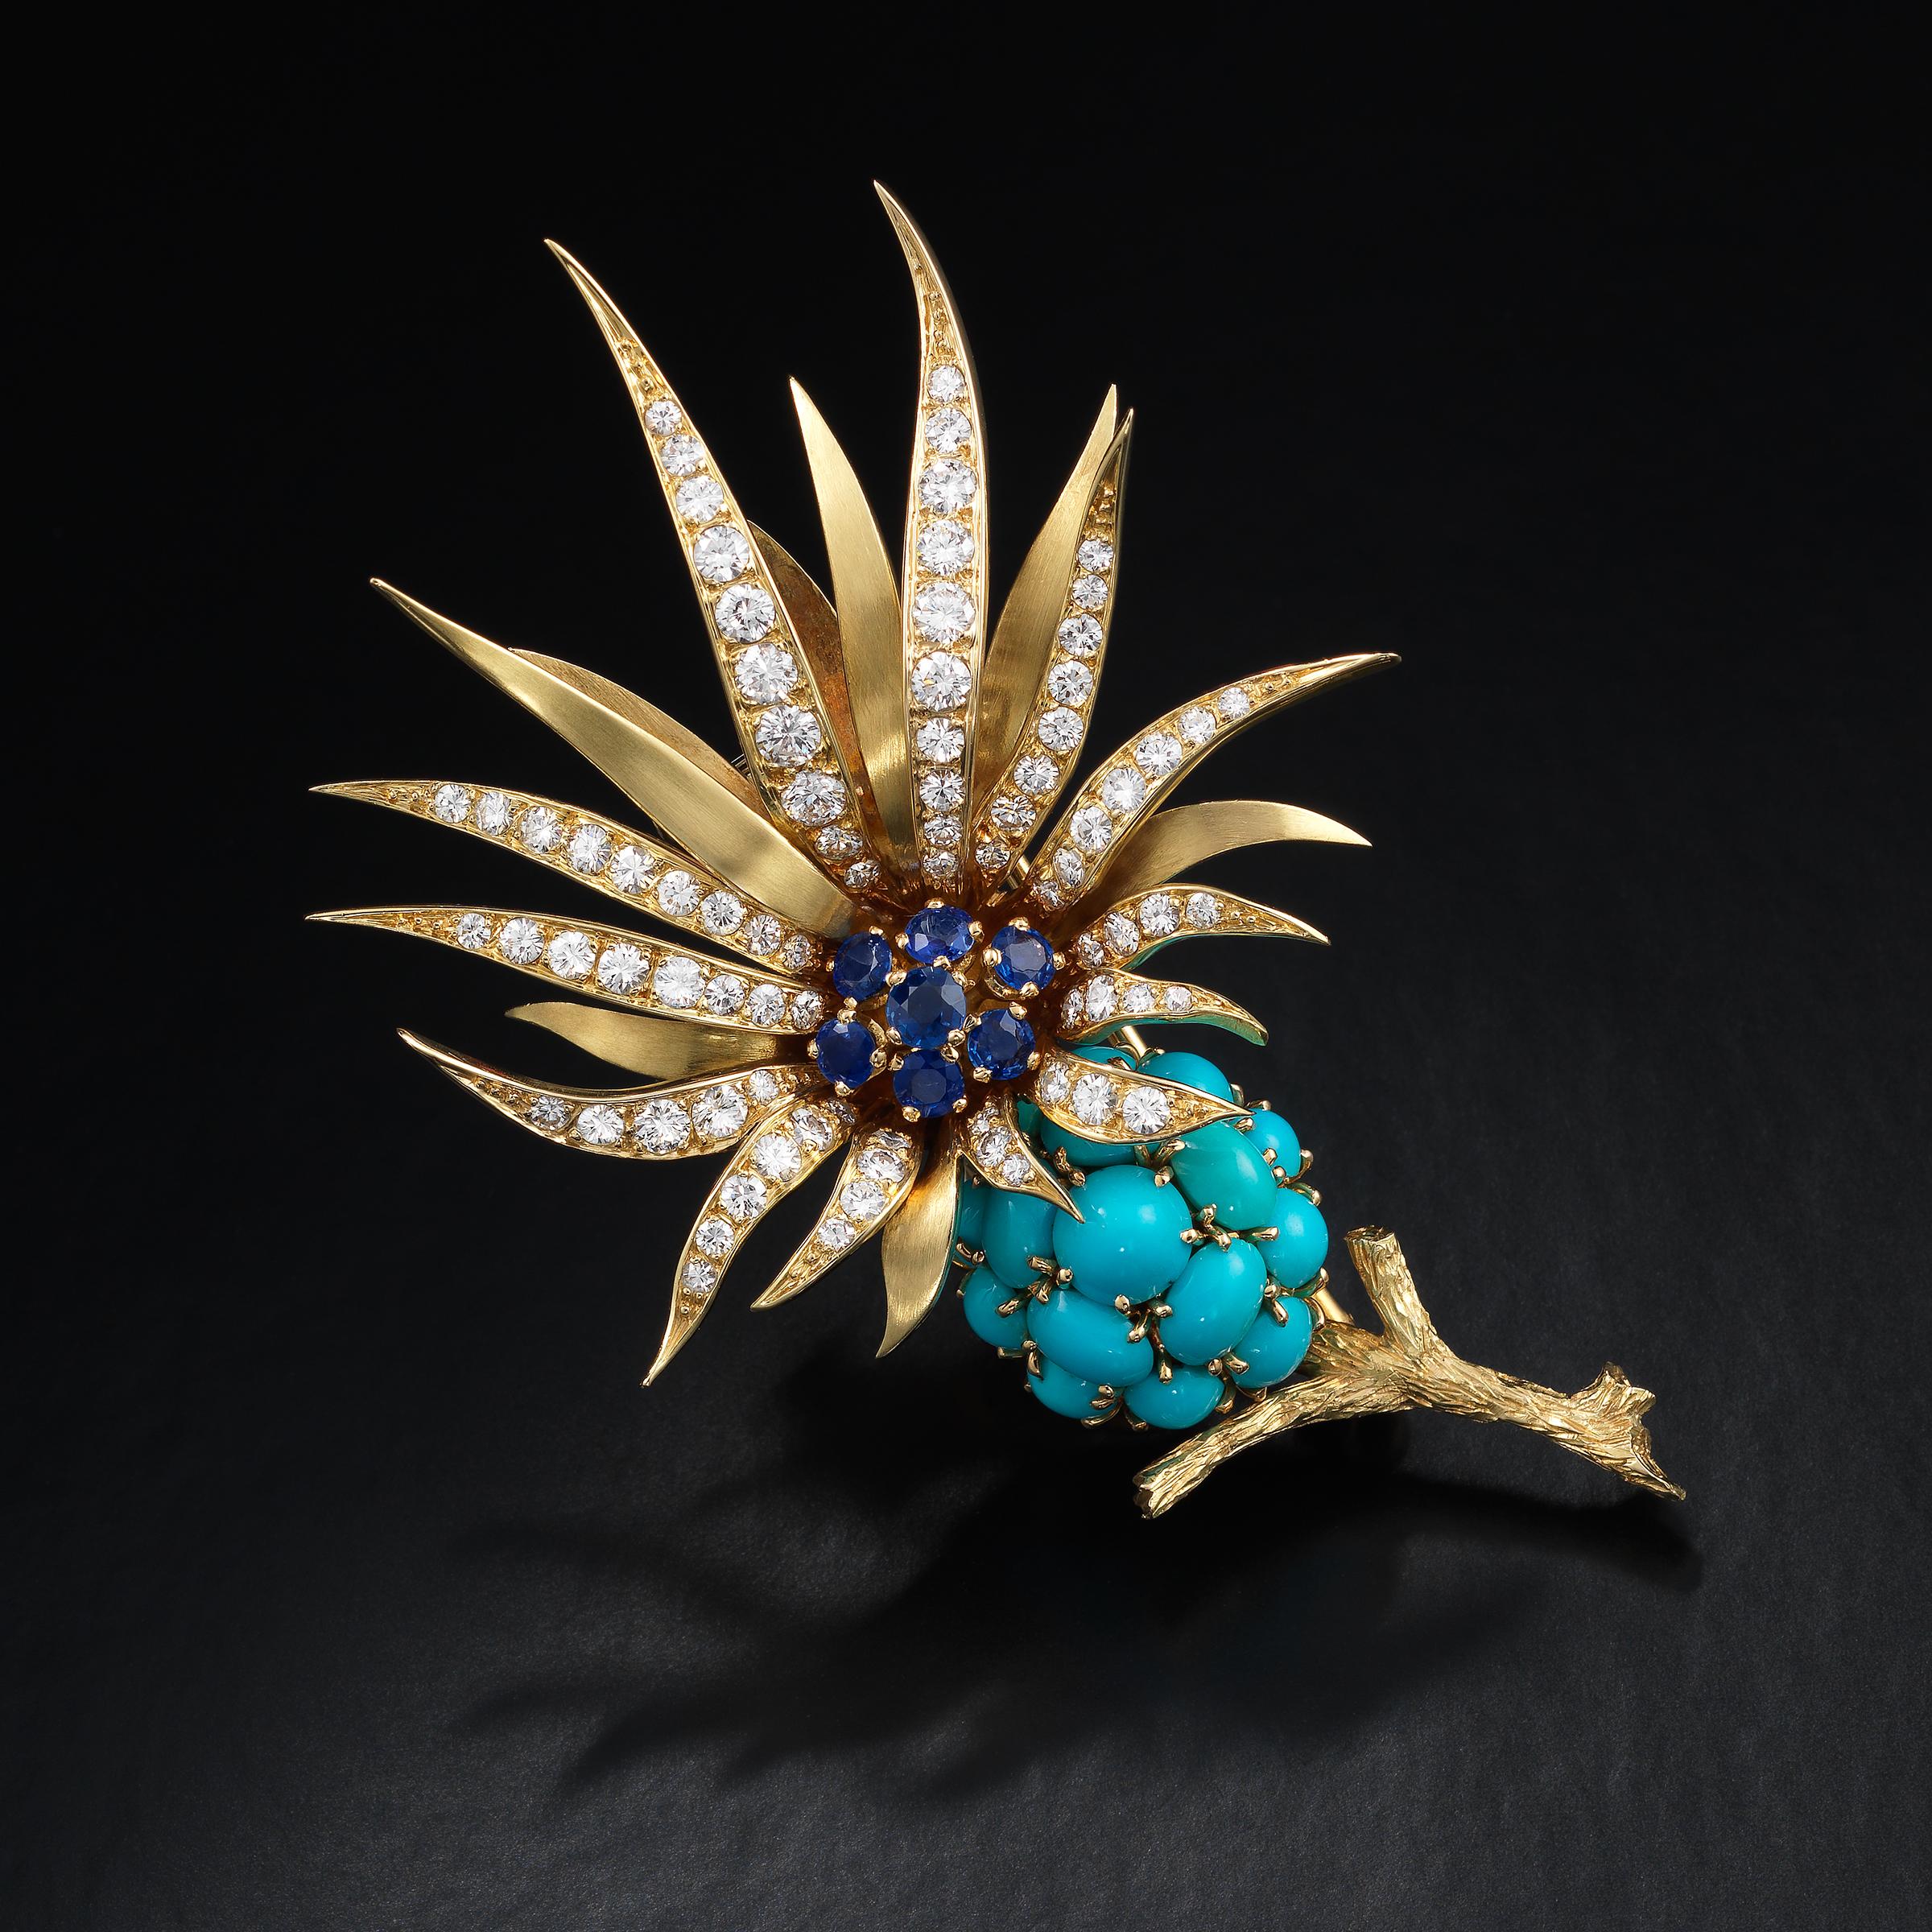 Spectacular and highly collectible 1950s brooch by Pierre Sterlé designed as flower in full bloom and featuring round blue sapphires, cabochon turquoise and round brilliant-cut diamonds, all set in 18 karat yellow gold. The brooch showcases many of